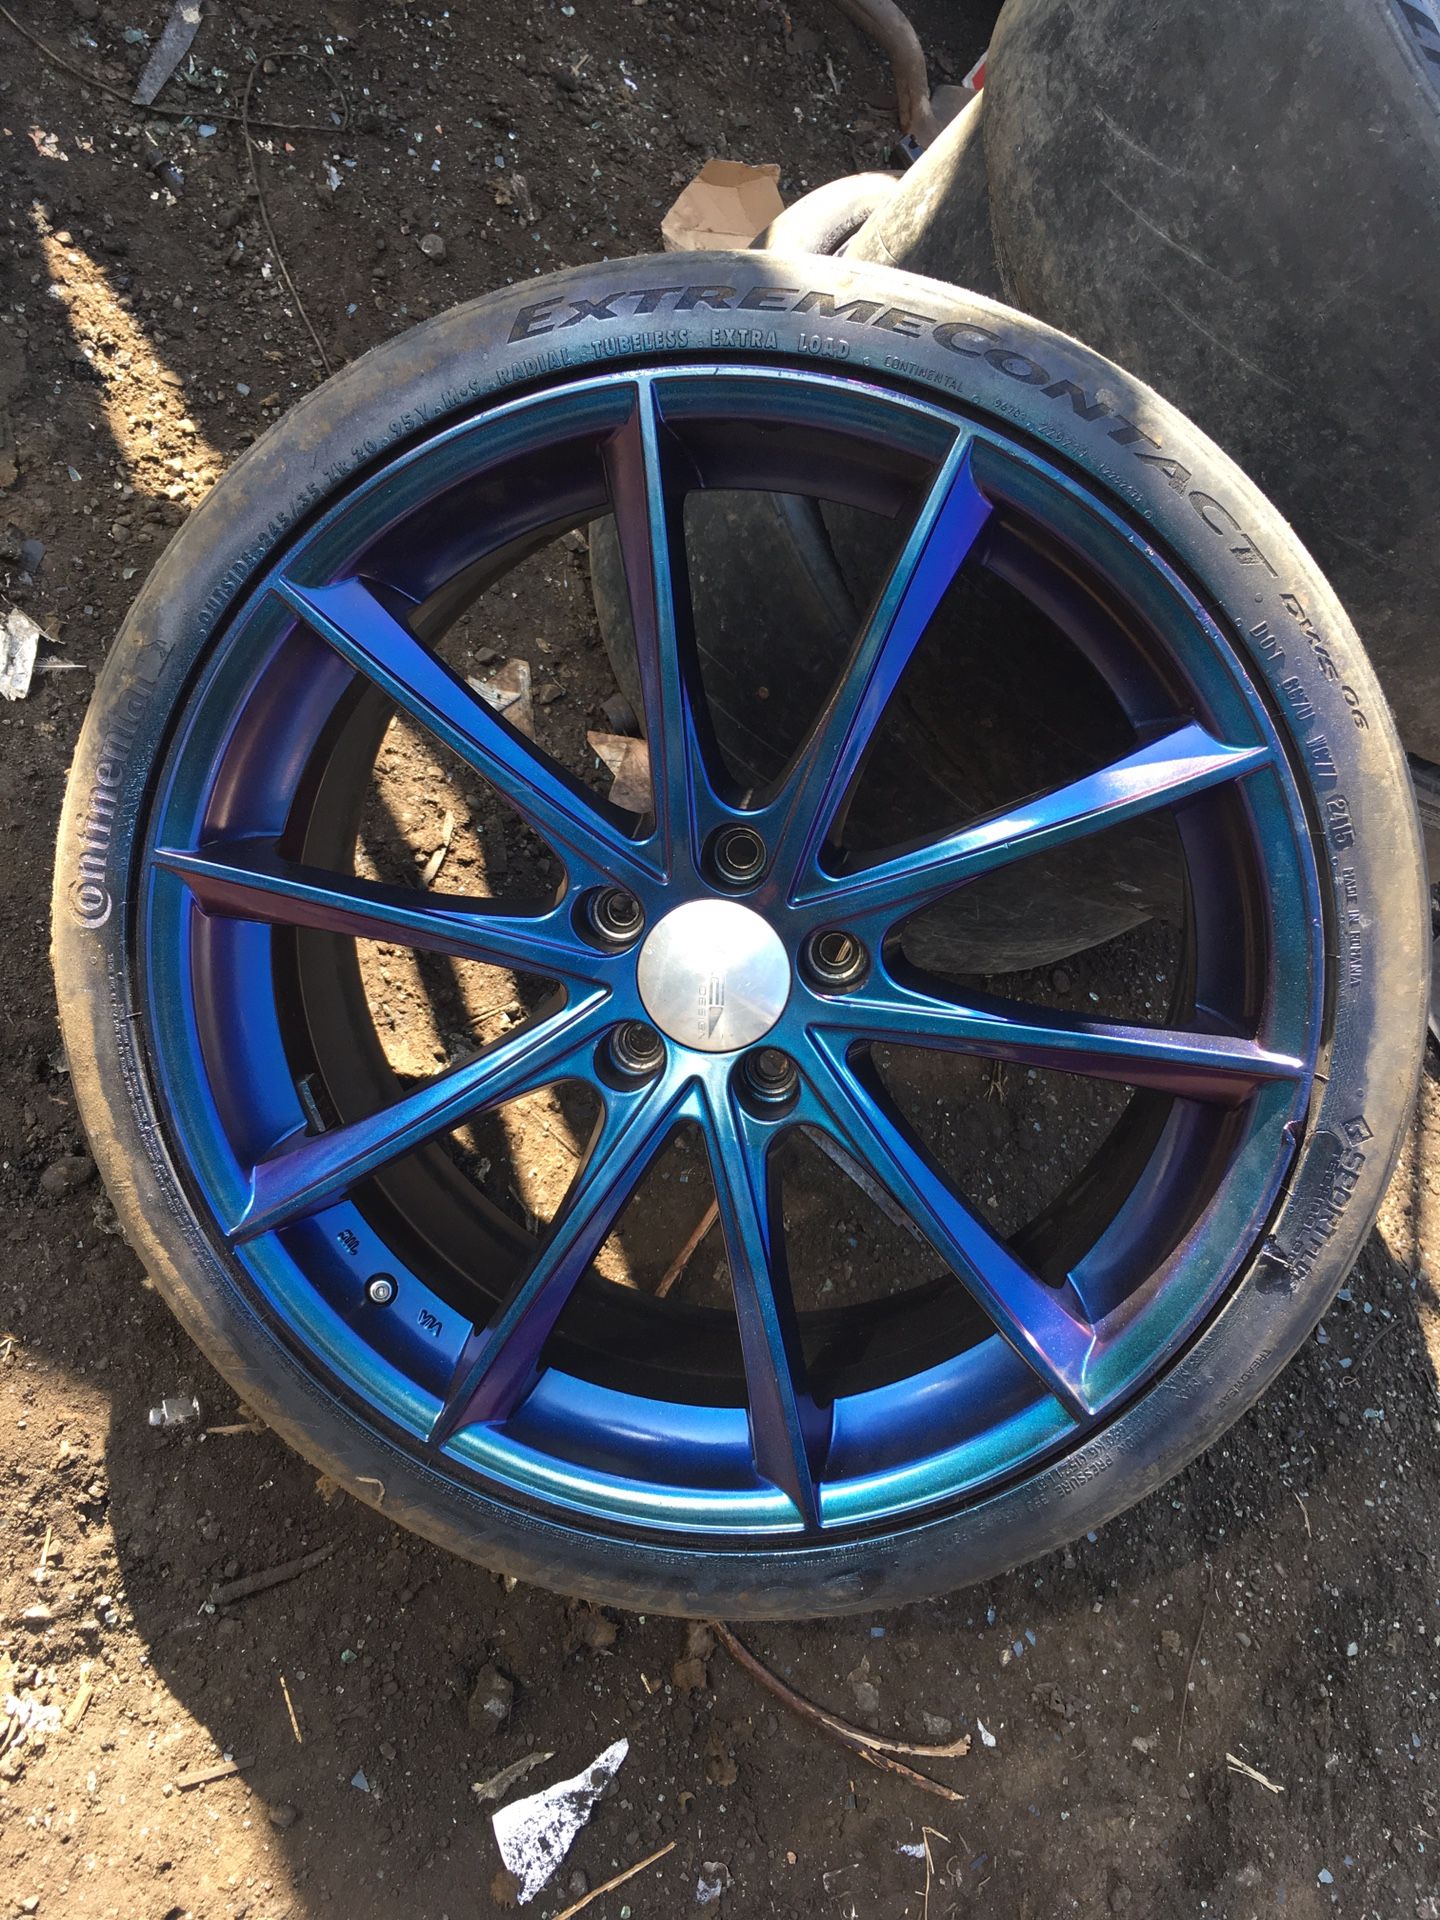 20s Need Tires $400 Or Best Offer